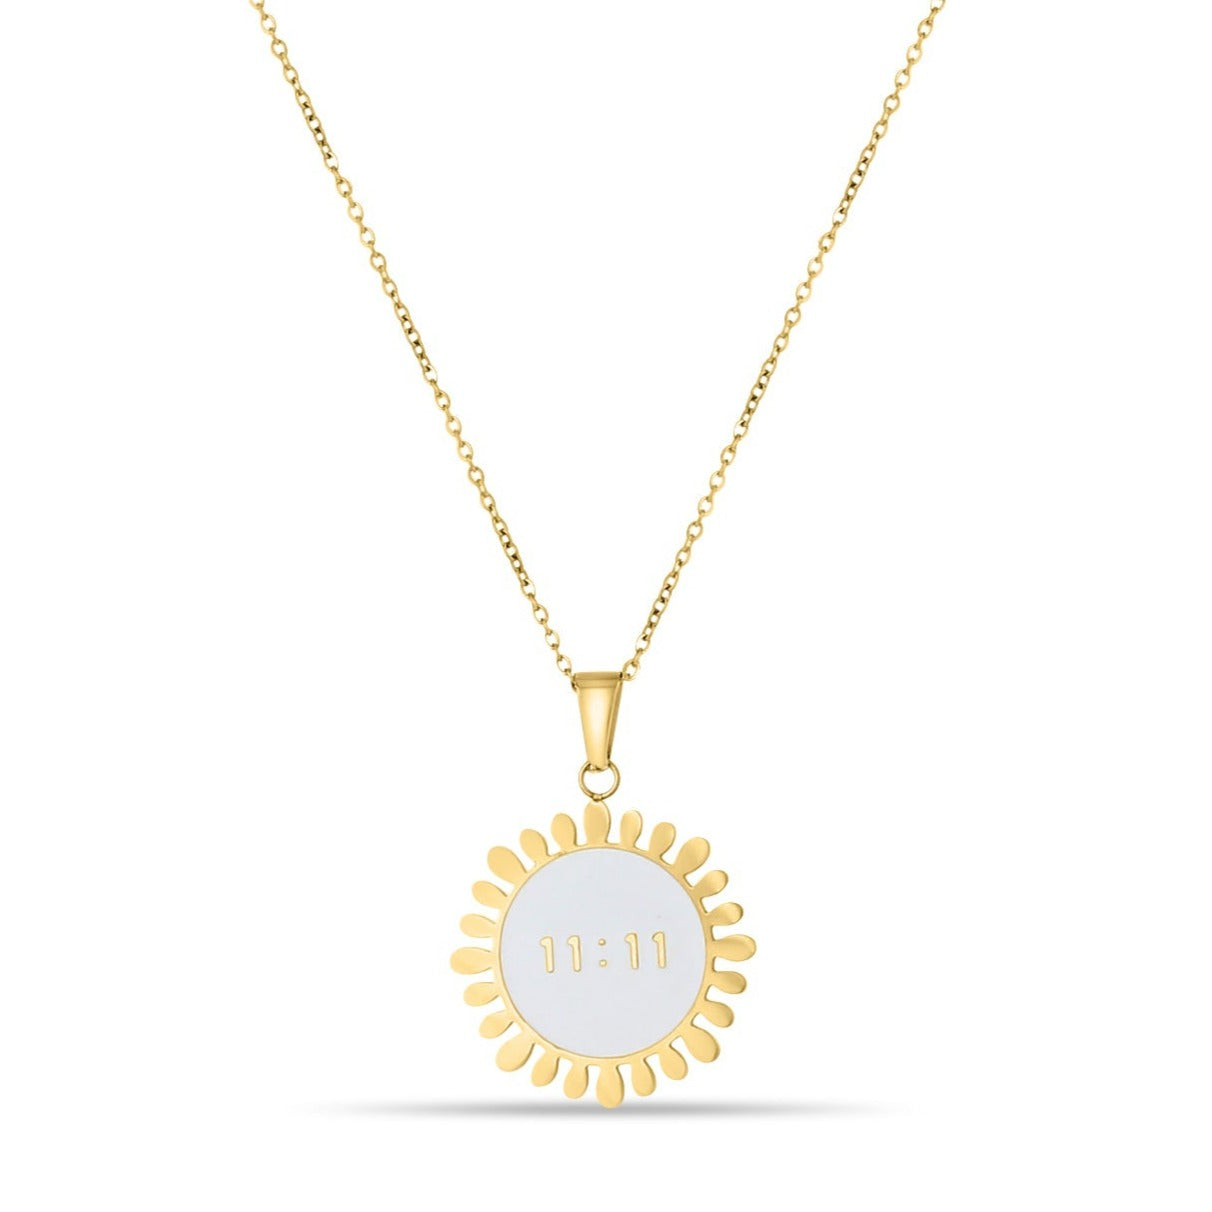 11:11 Pendant - Fab Couture